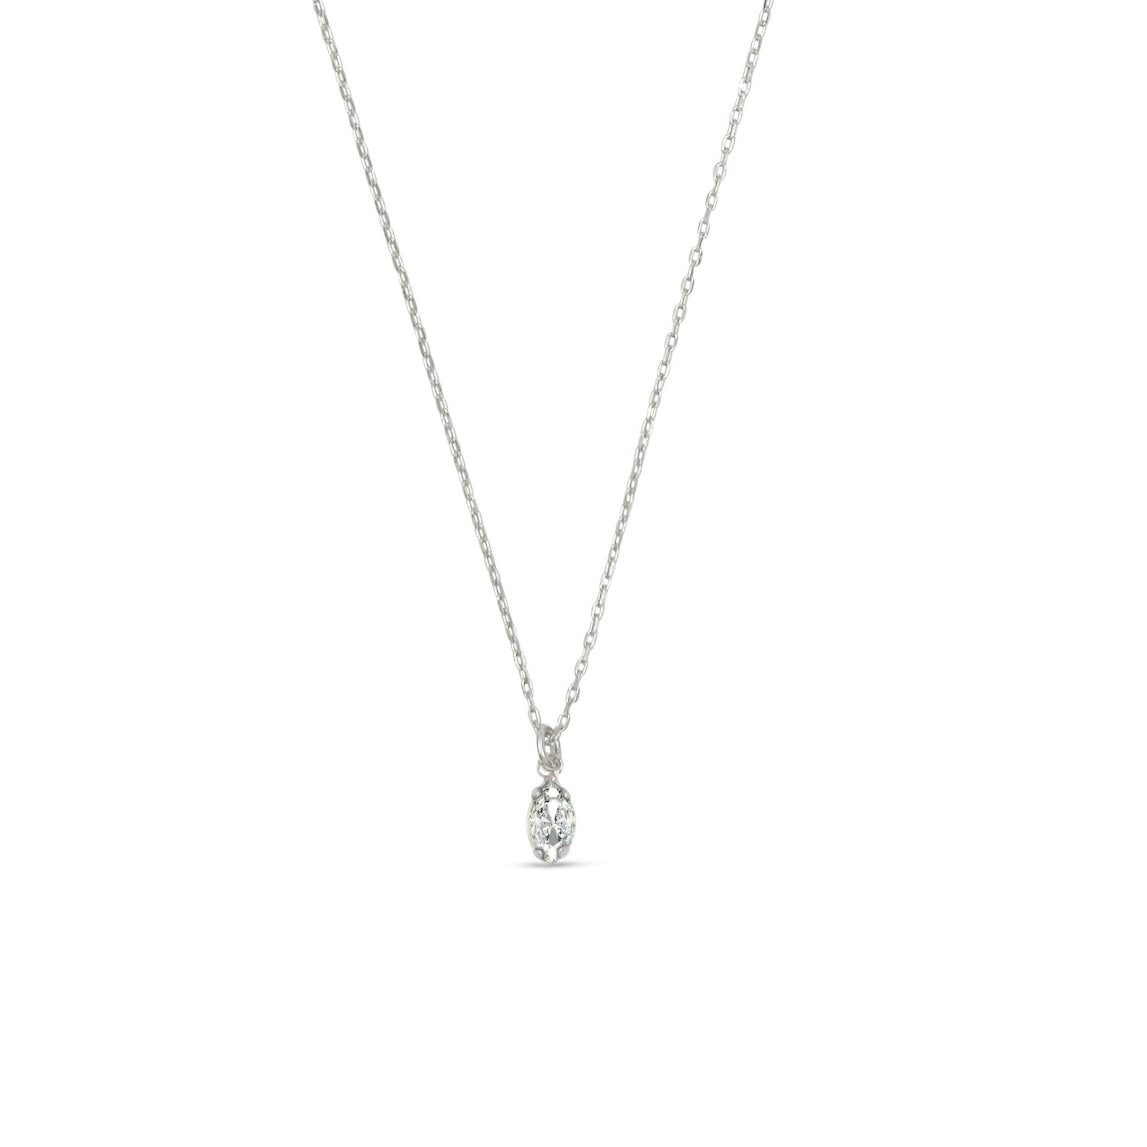 Tiny Marquis Necklace - Bing Bang Jewelry NYC